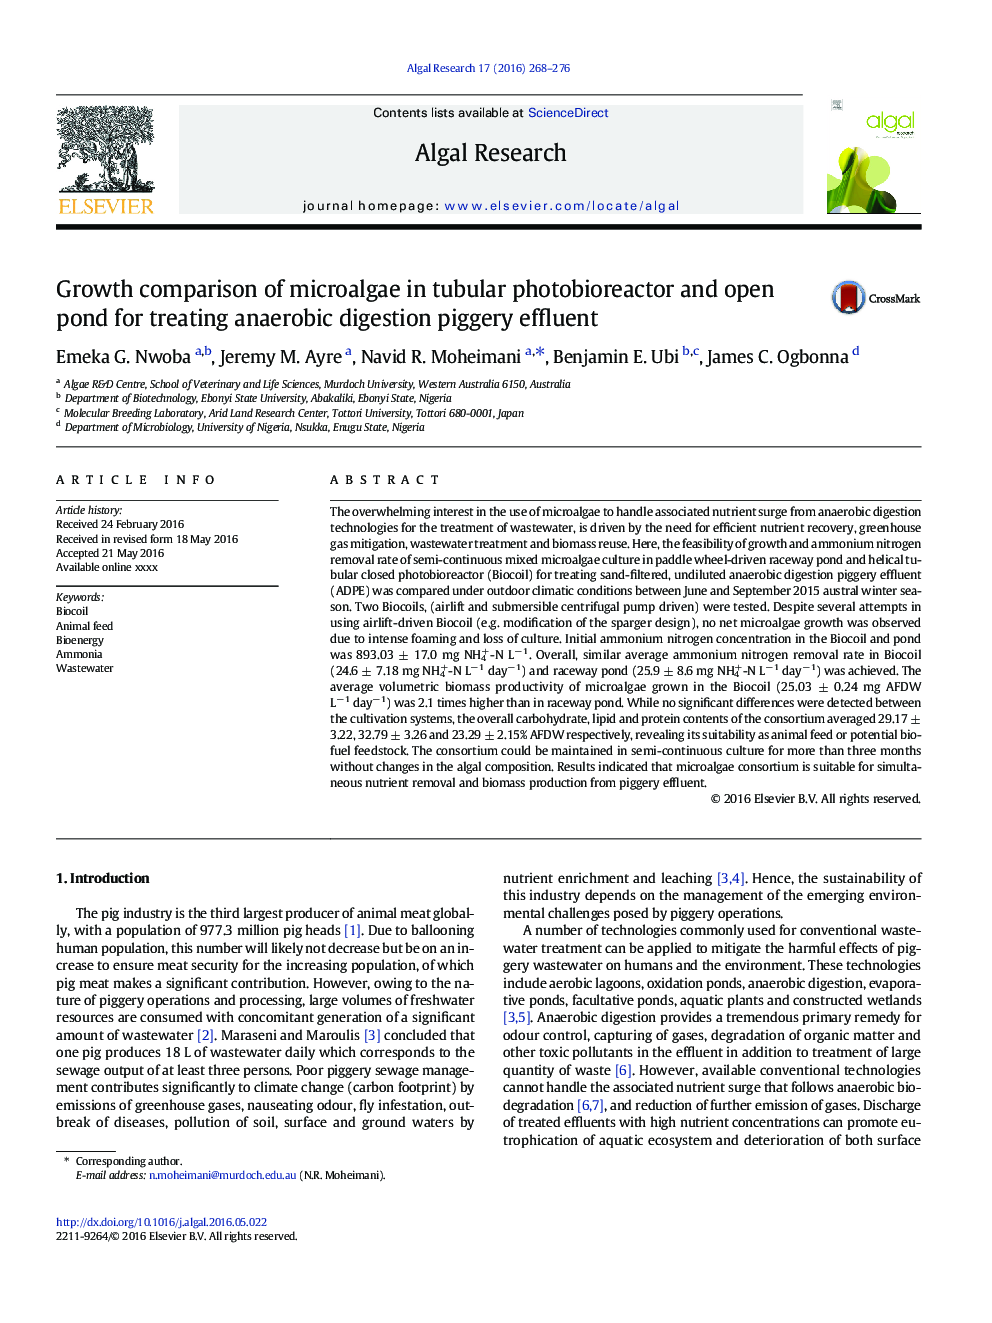 Growth comparison of microalgae in tubular photobioreactor and open pond for treating anaerobic digestion piggery effluent